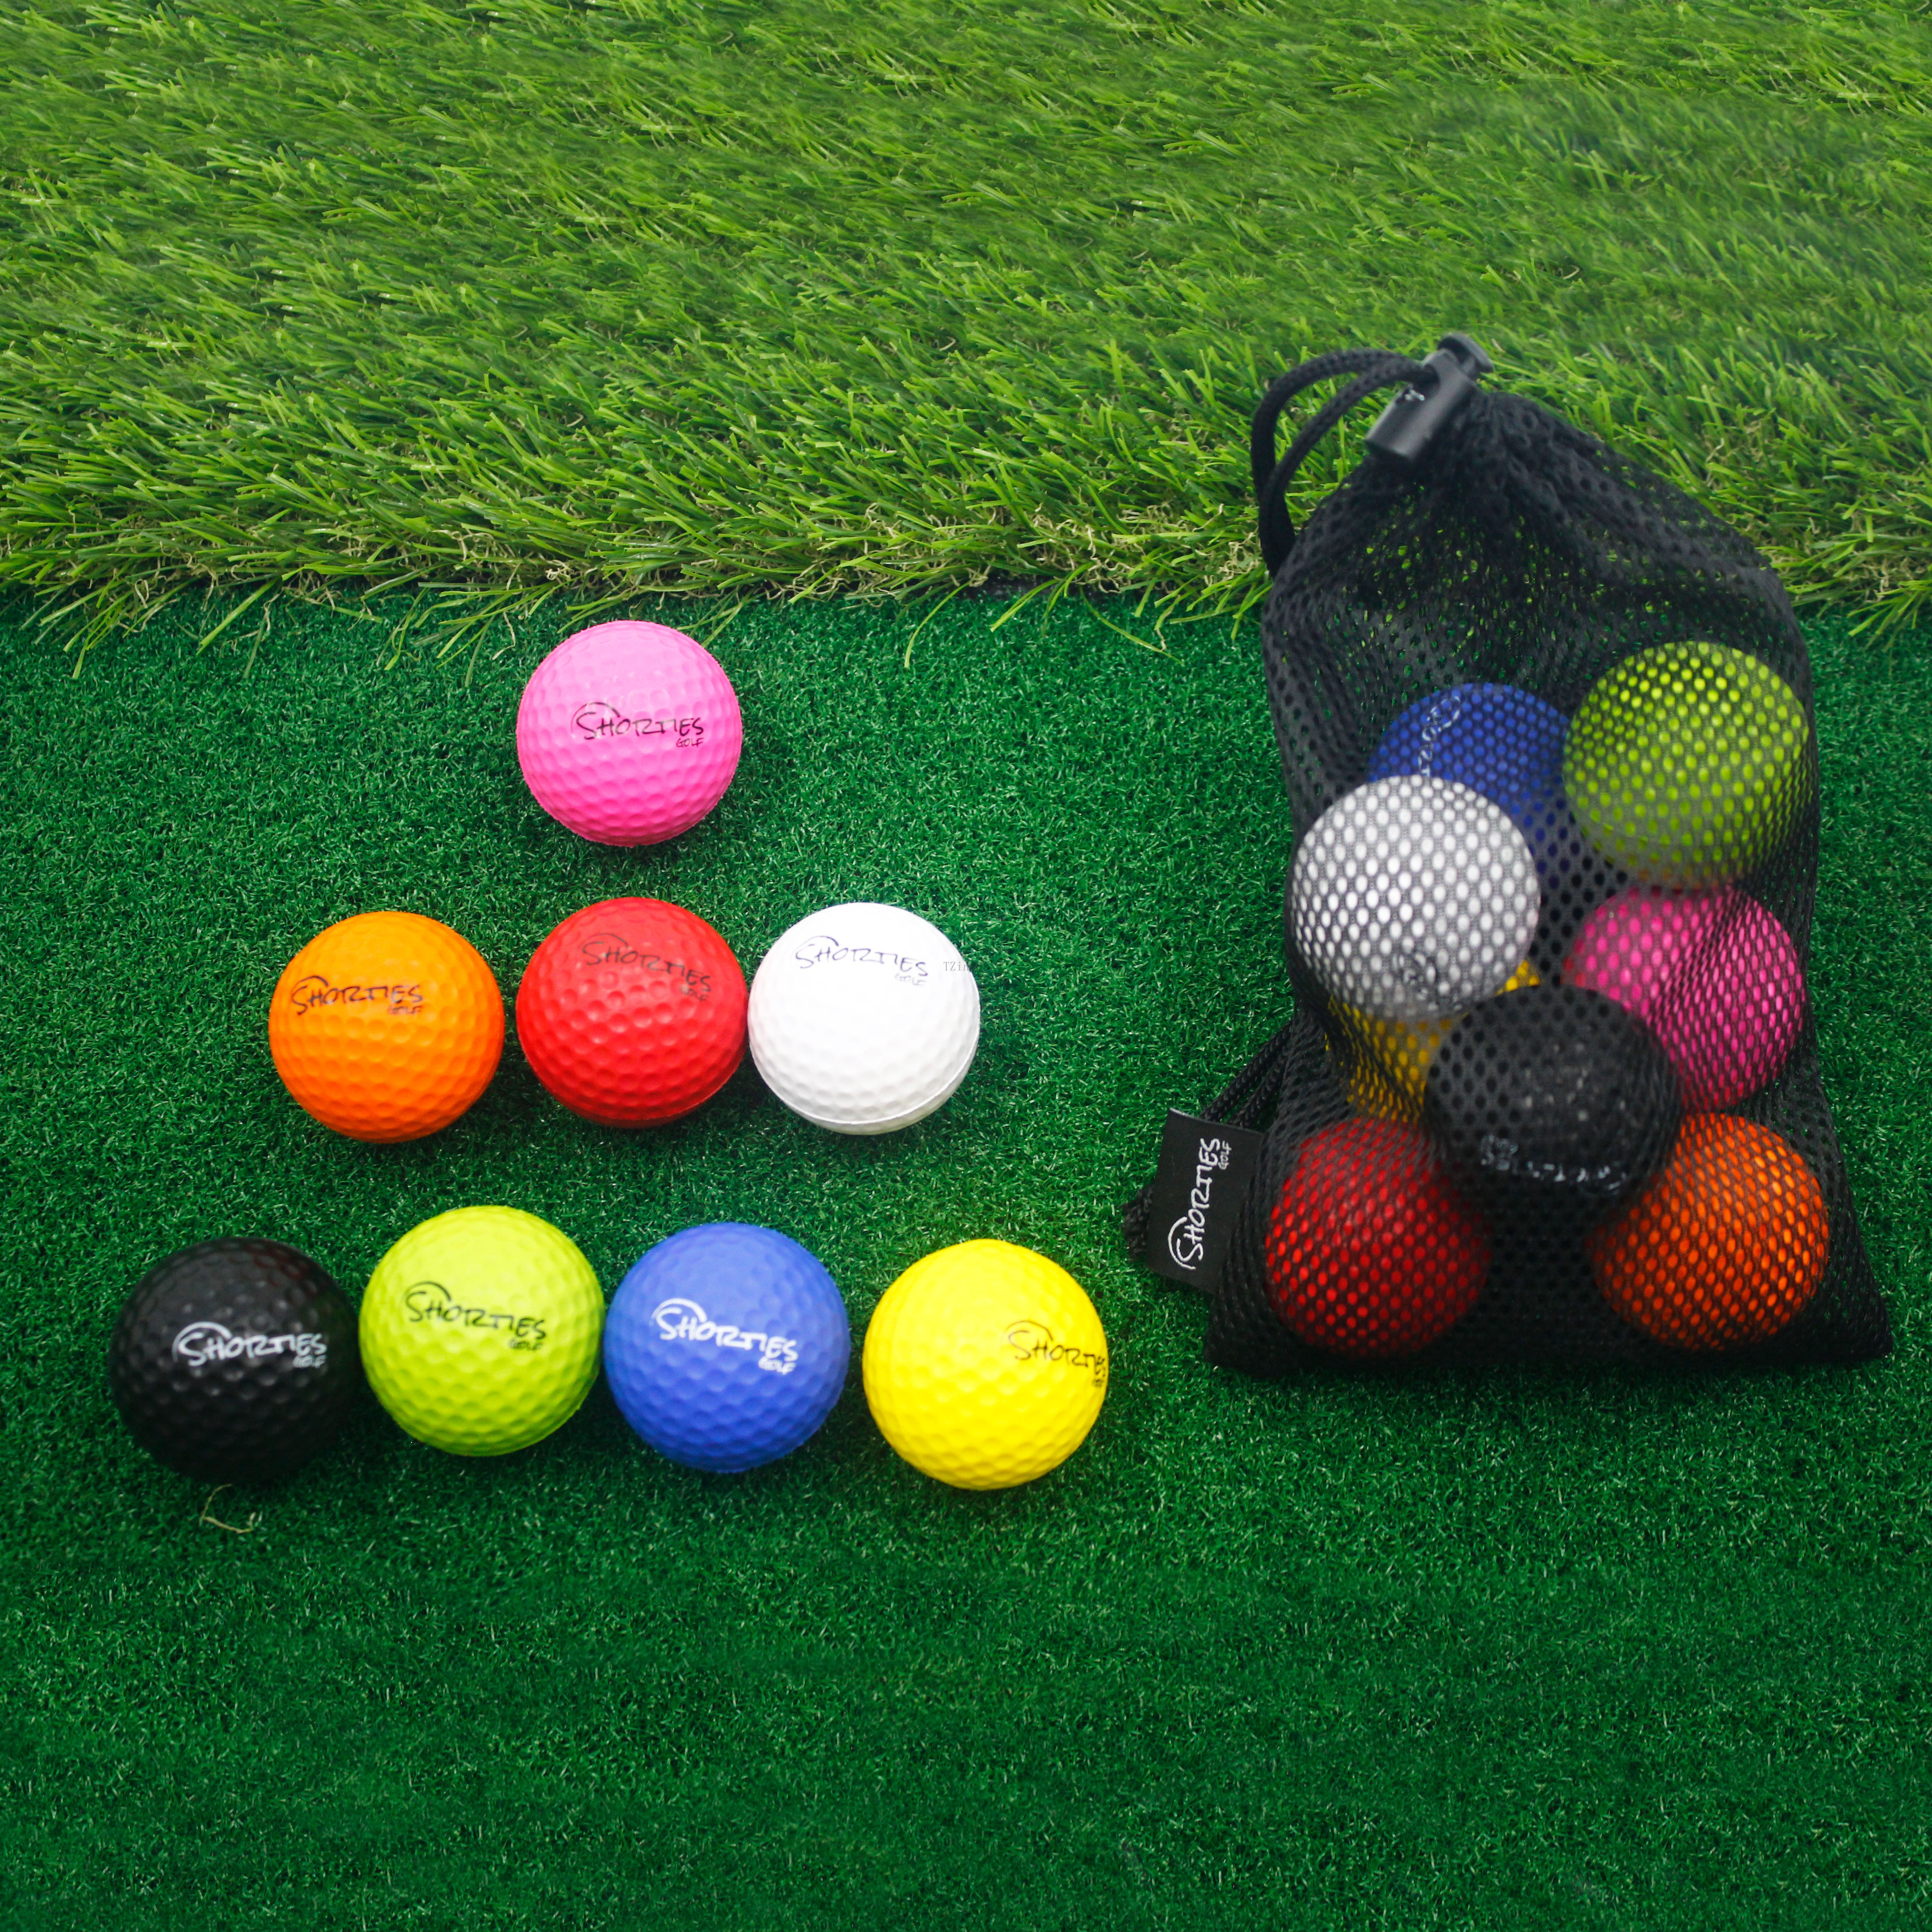 Factory Price 8 Pack Foam Golf Practice Balls - Realistic Feel and Limited Flight Training Balls for Indoor or Outdoor